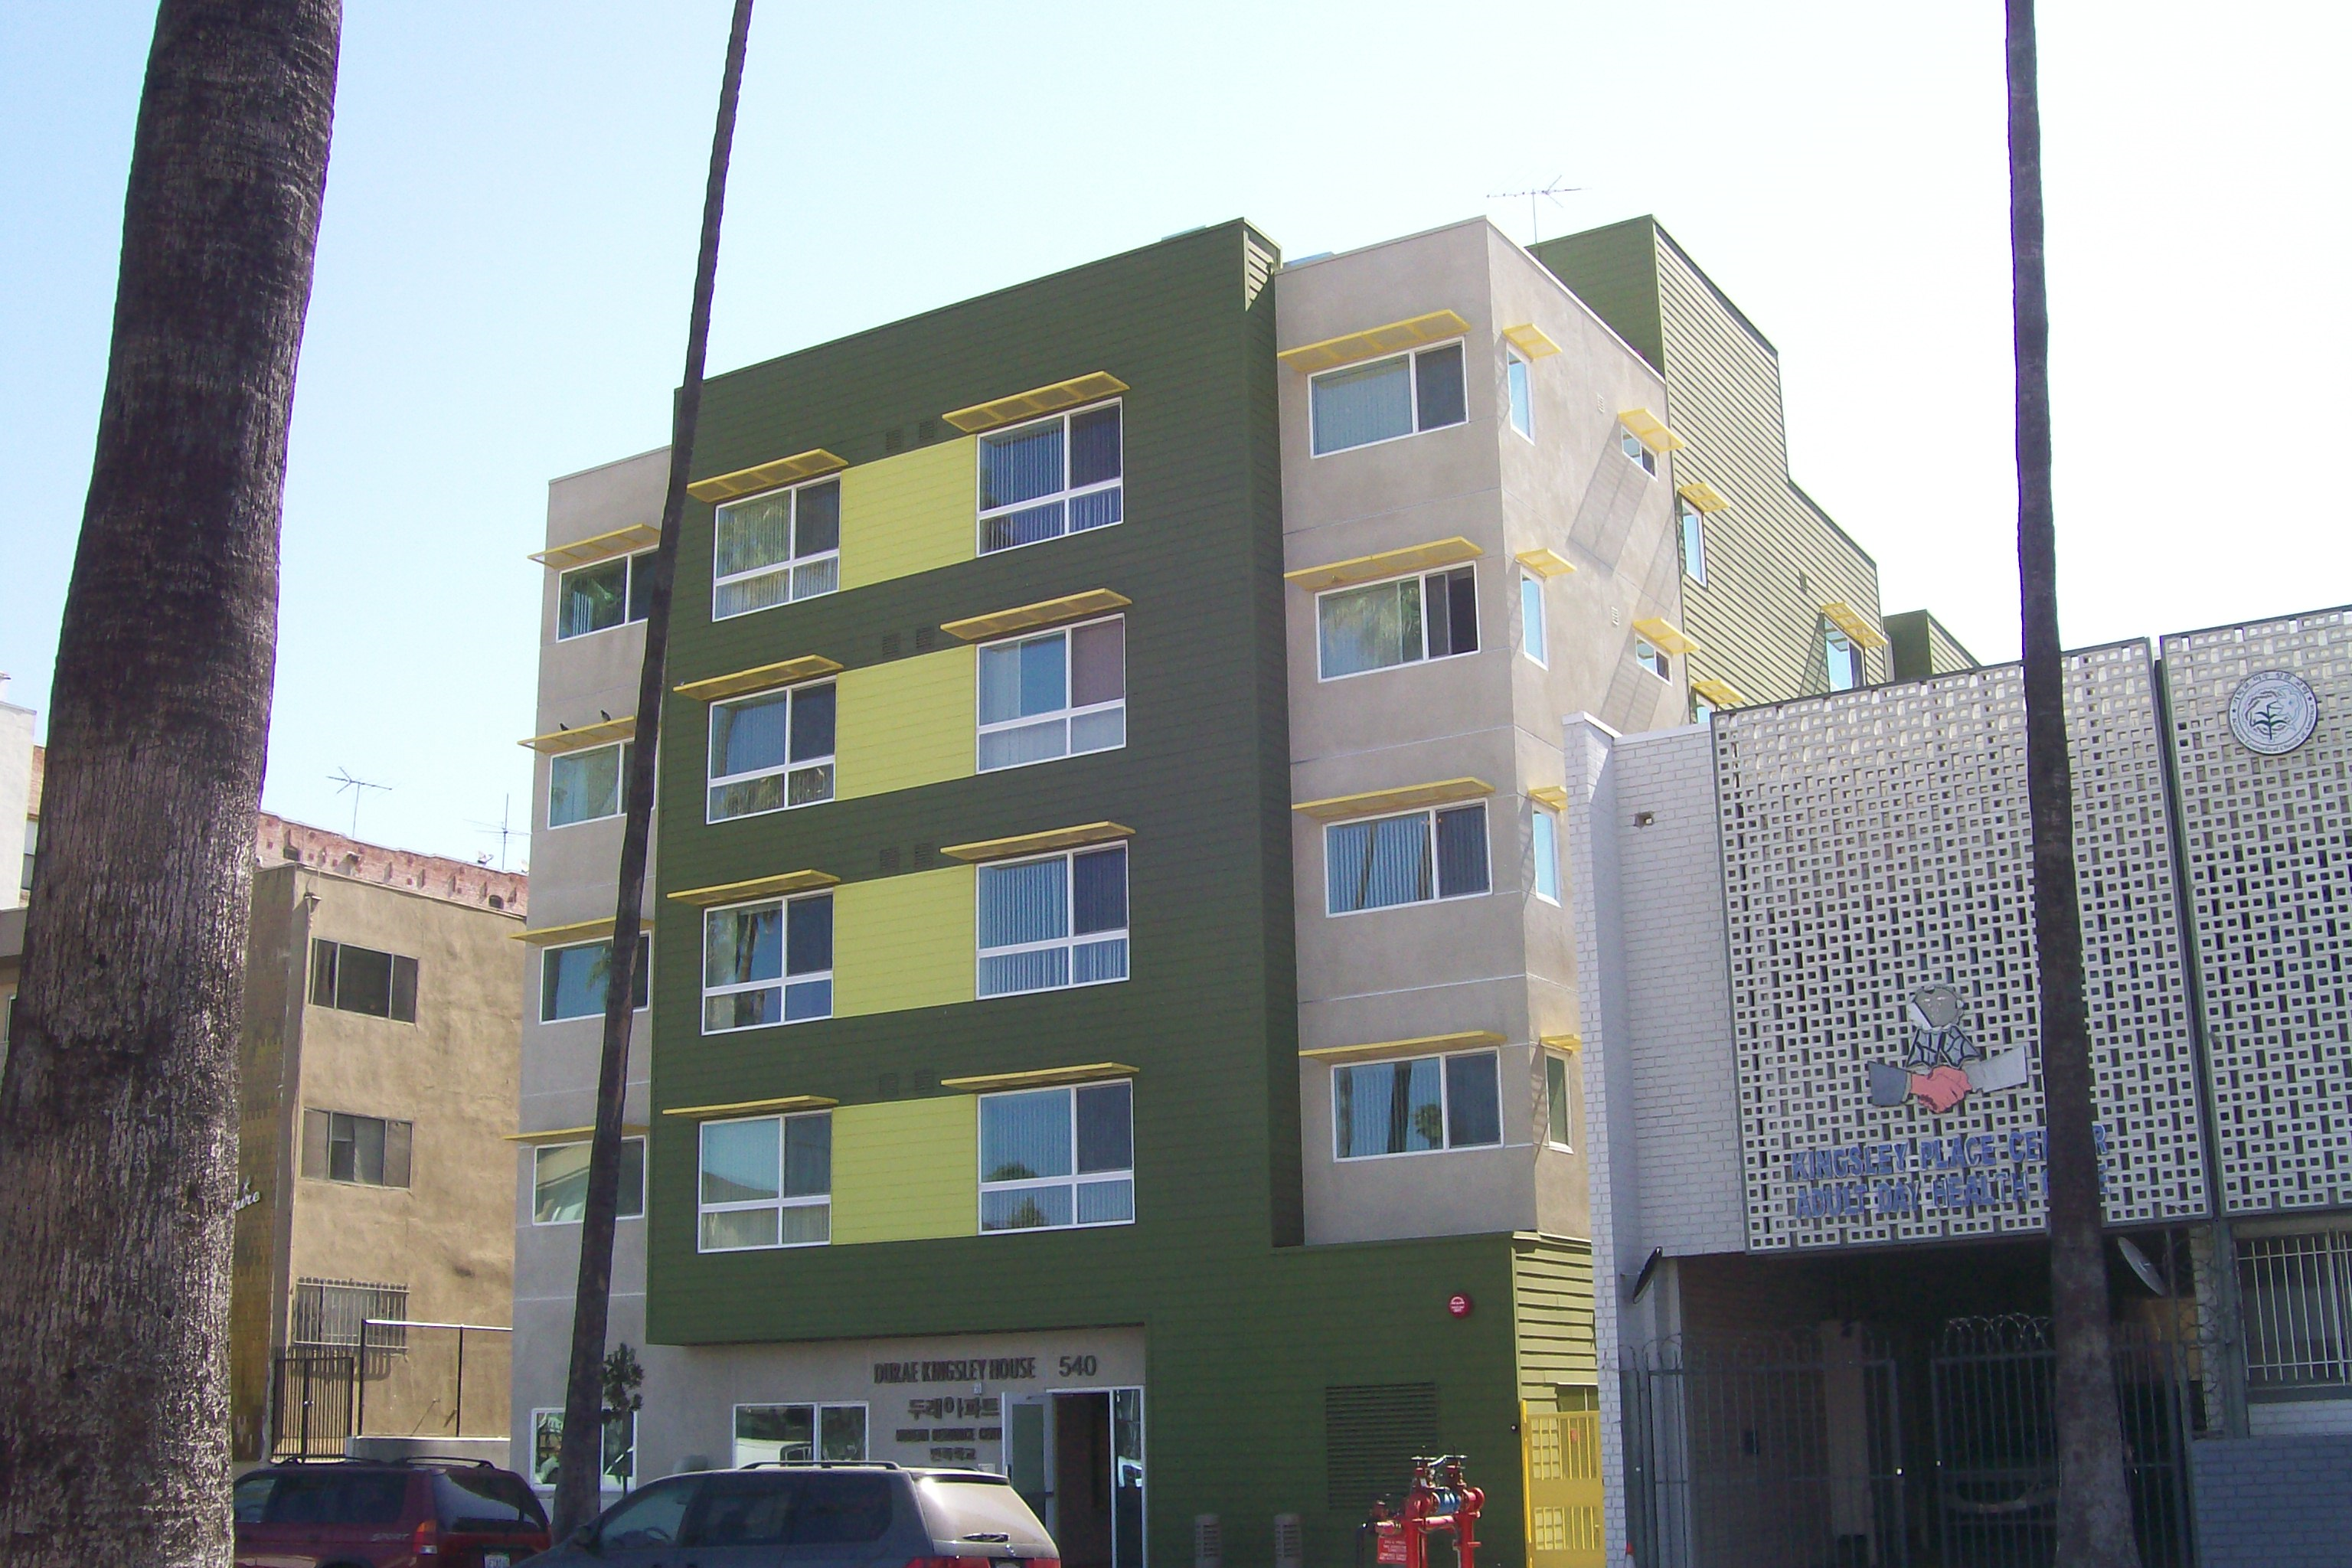 Right side of a colorful four story building, dark green-Lime green and beige colors, multiple windows, parked cars, fire hydrant, palm tree.